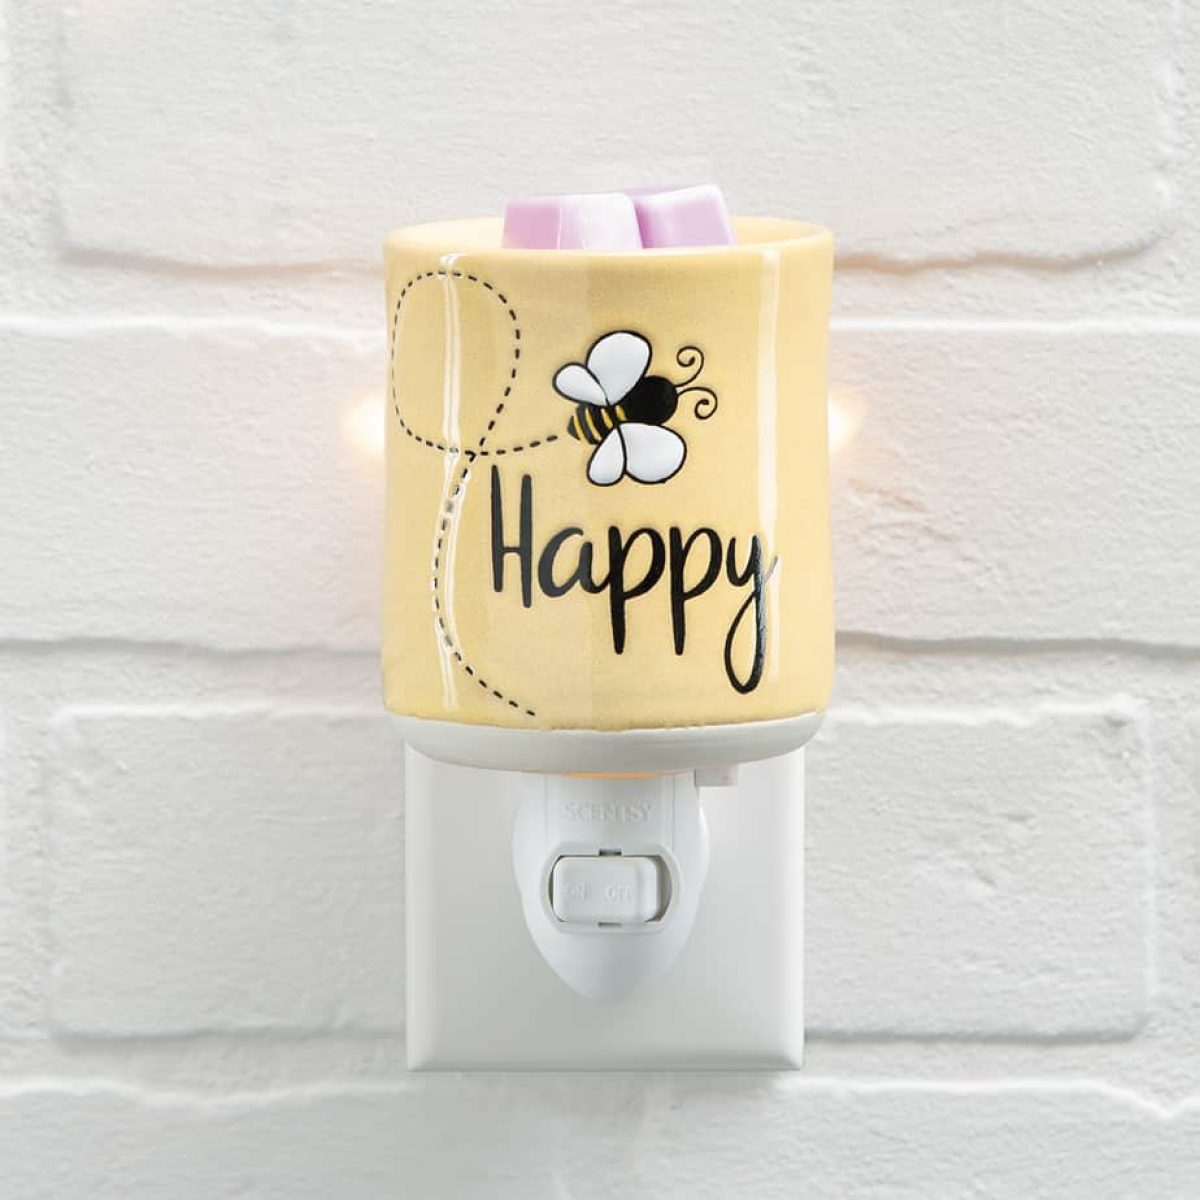 Download Be Happy Mini Warmer Scentsy Online Store Shop Scentsy Products